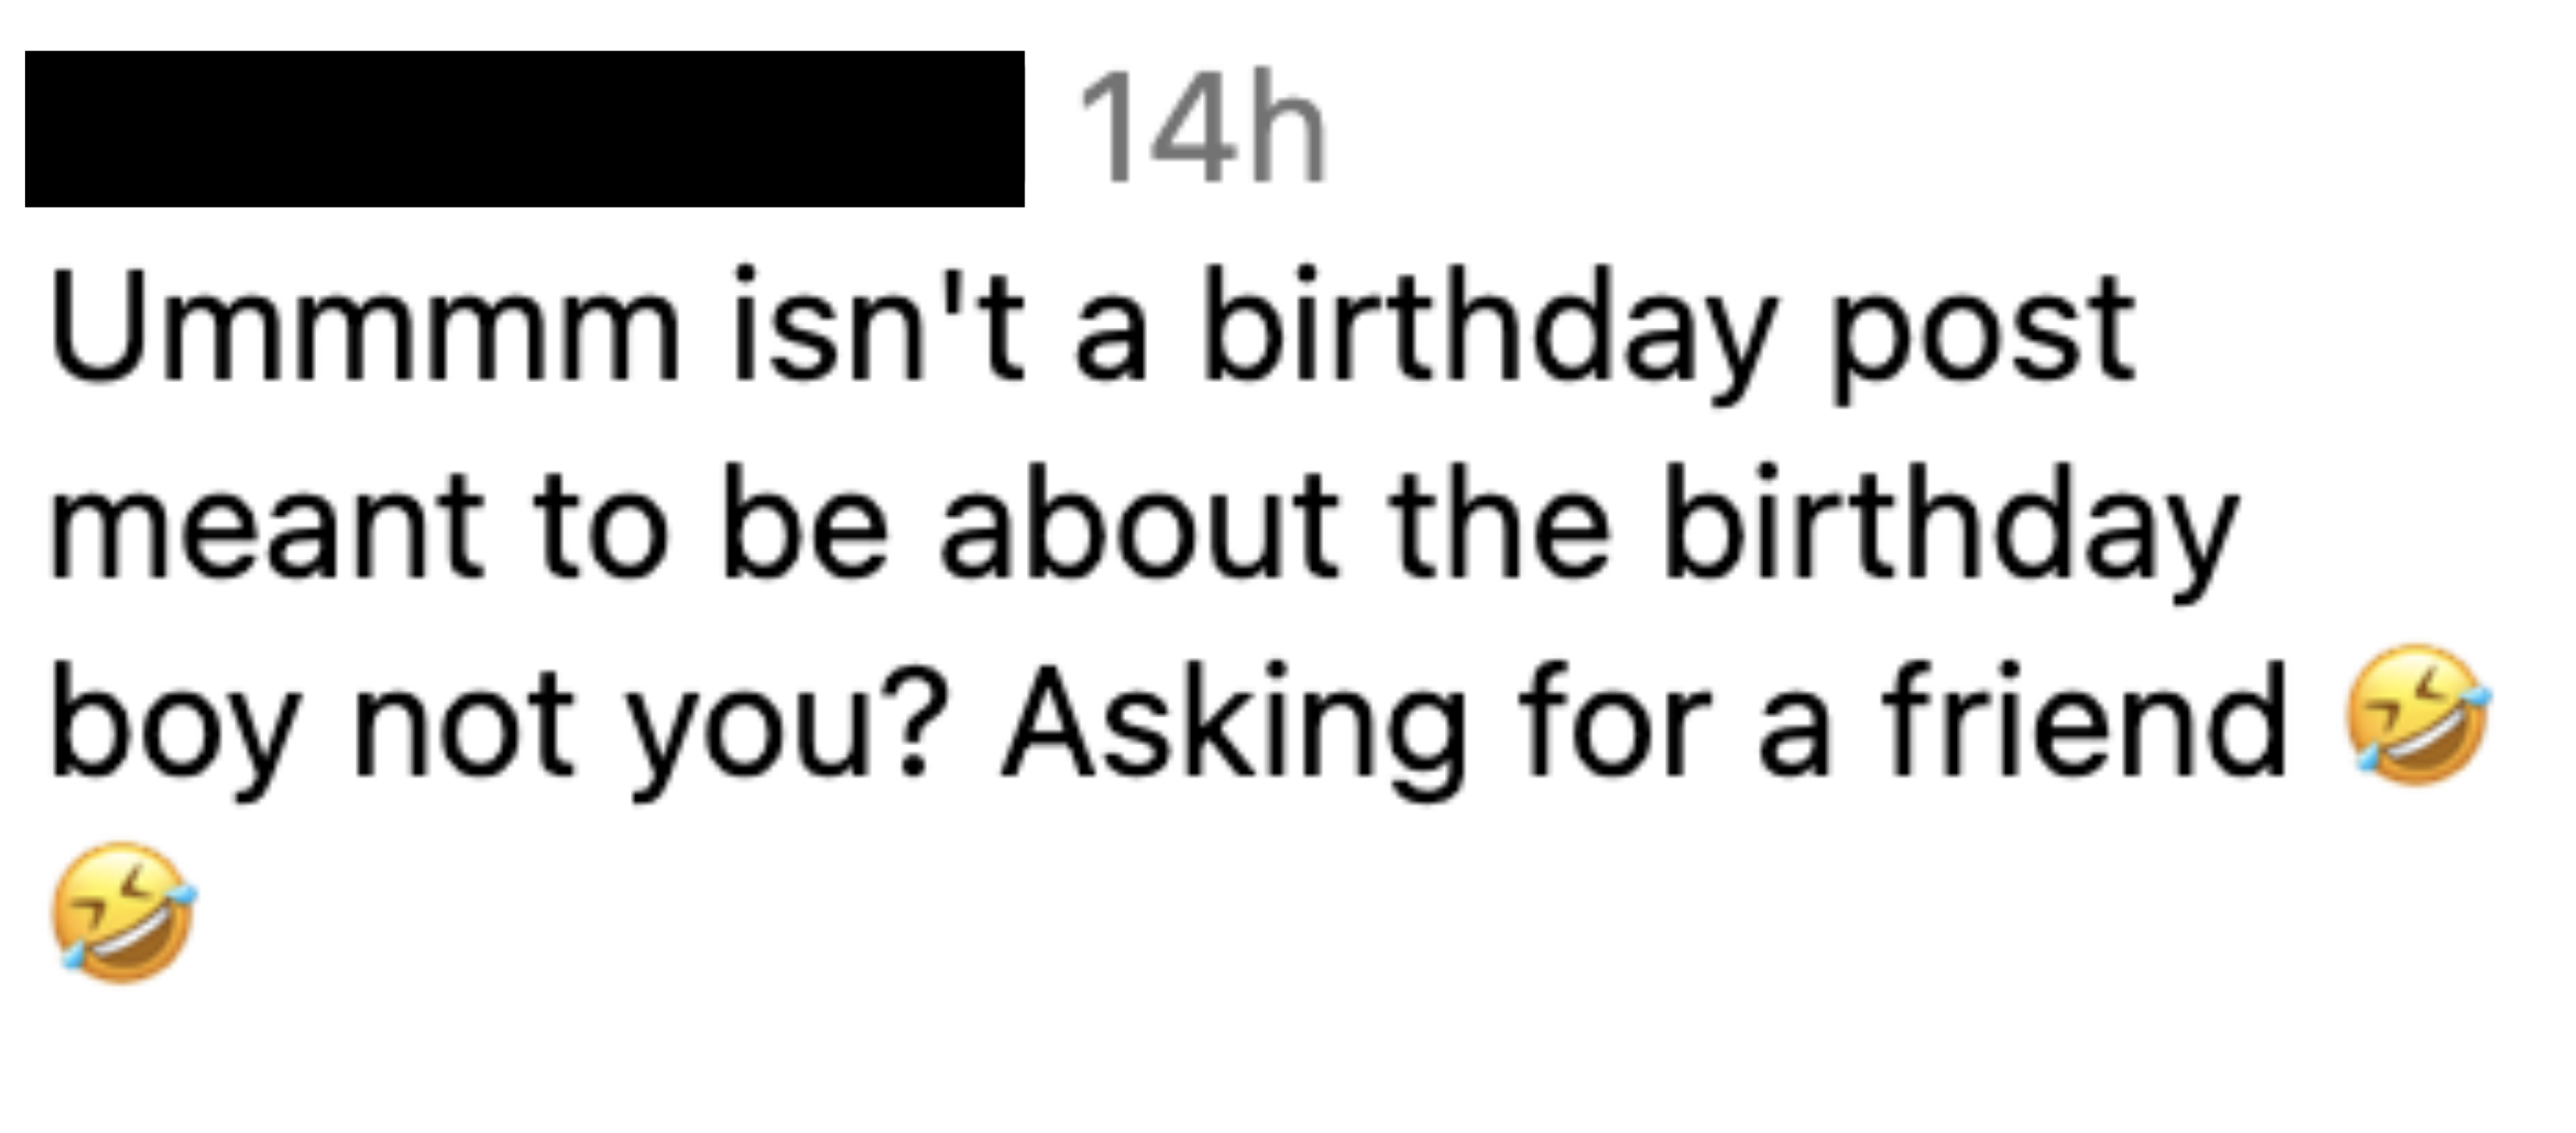 &quot;Ummmm isn&#x27;t a birthday post meant to be about the birthday boy not you?&quot;